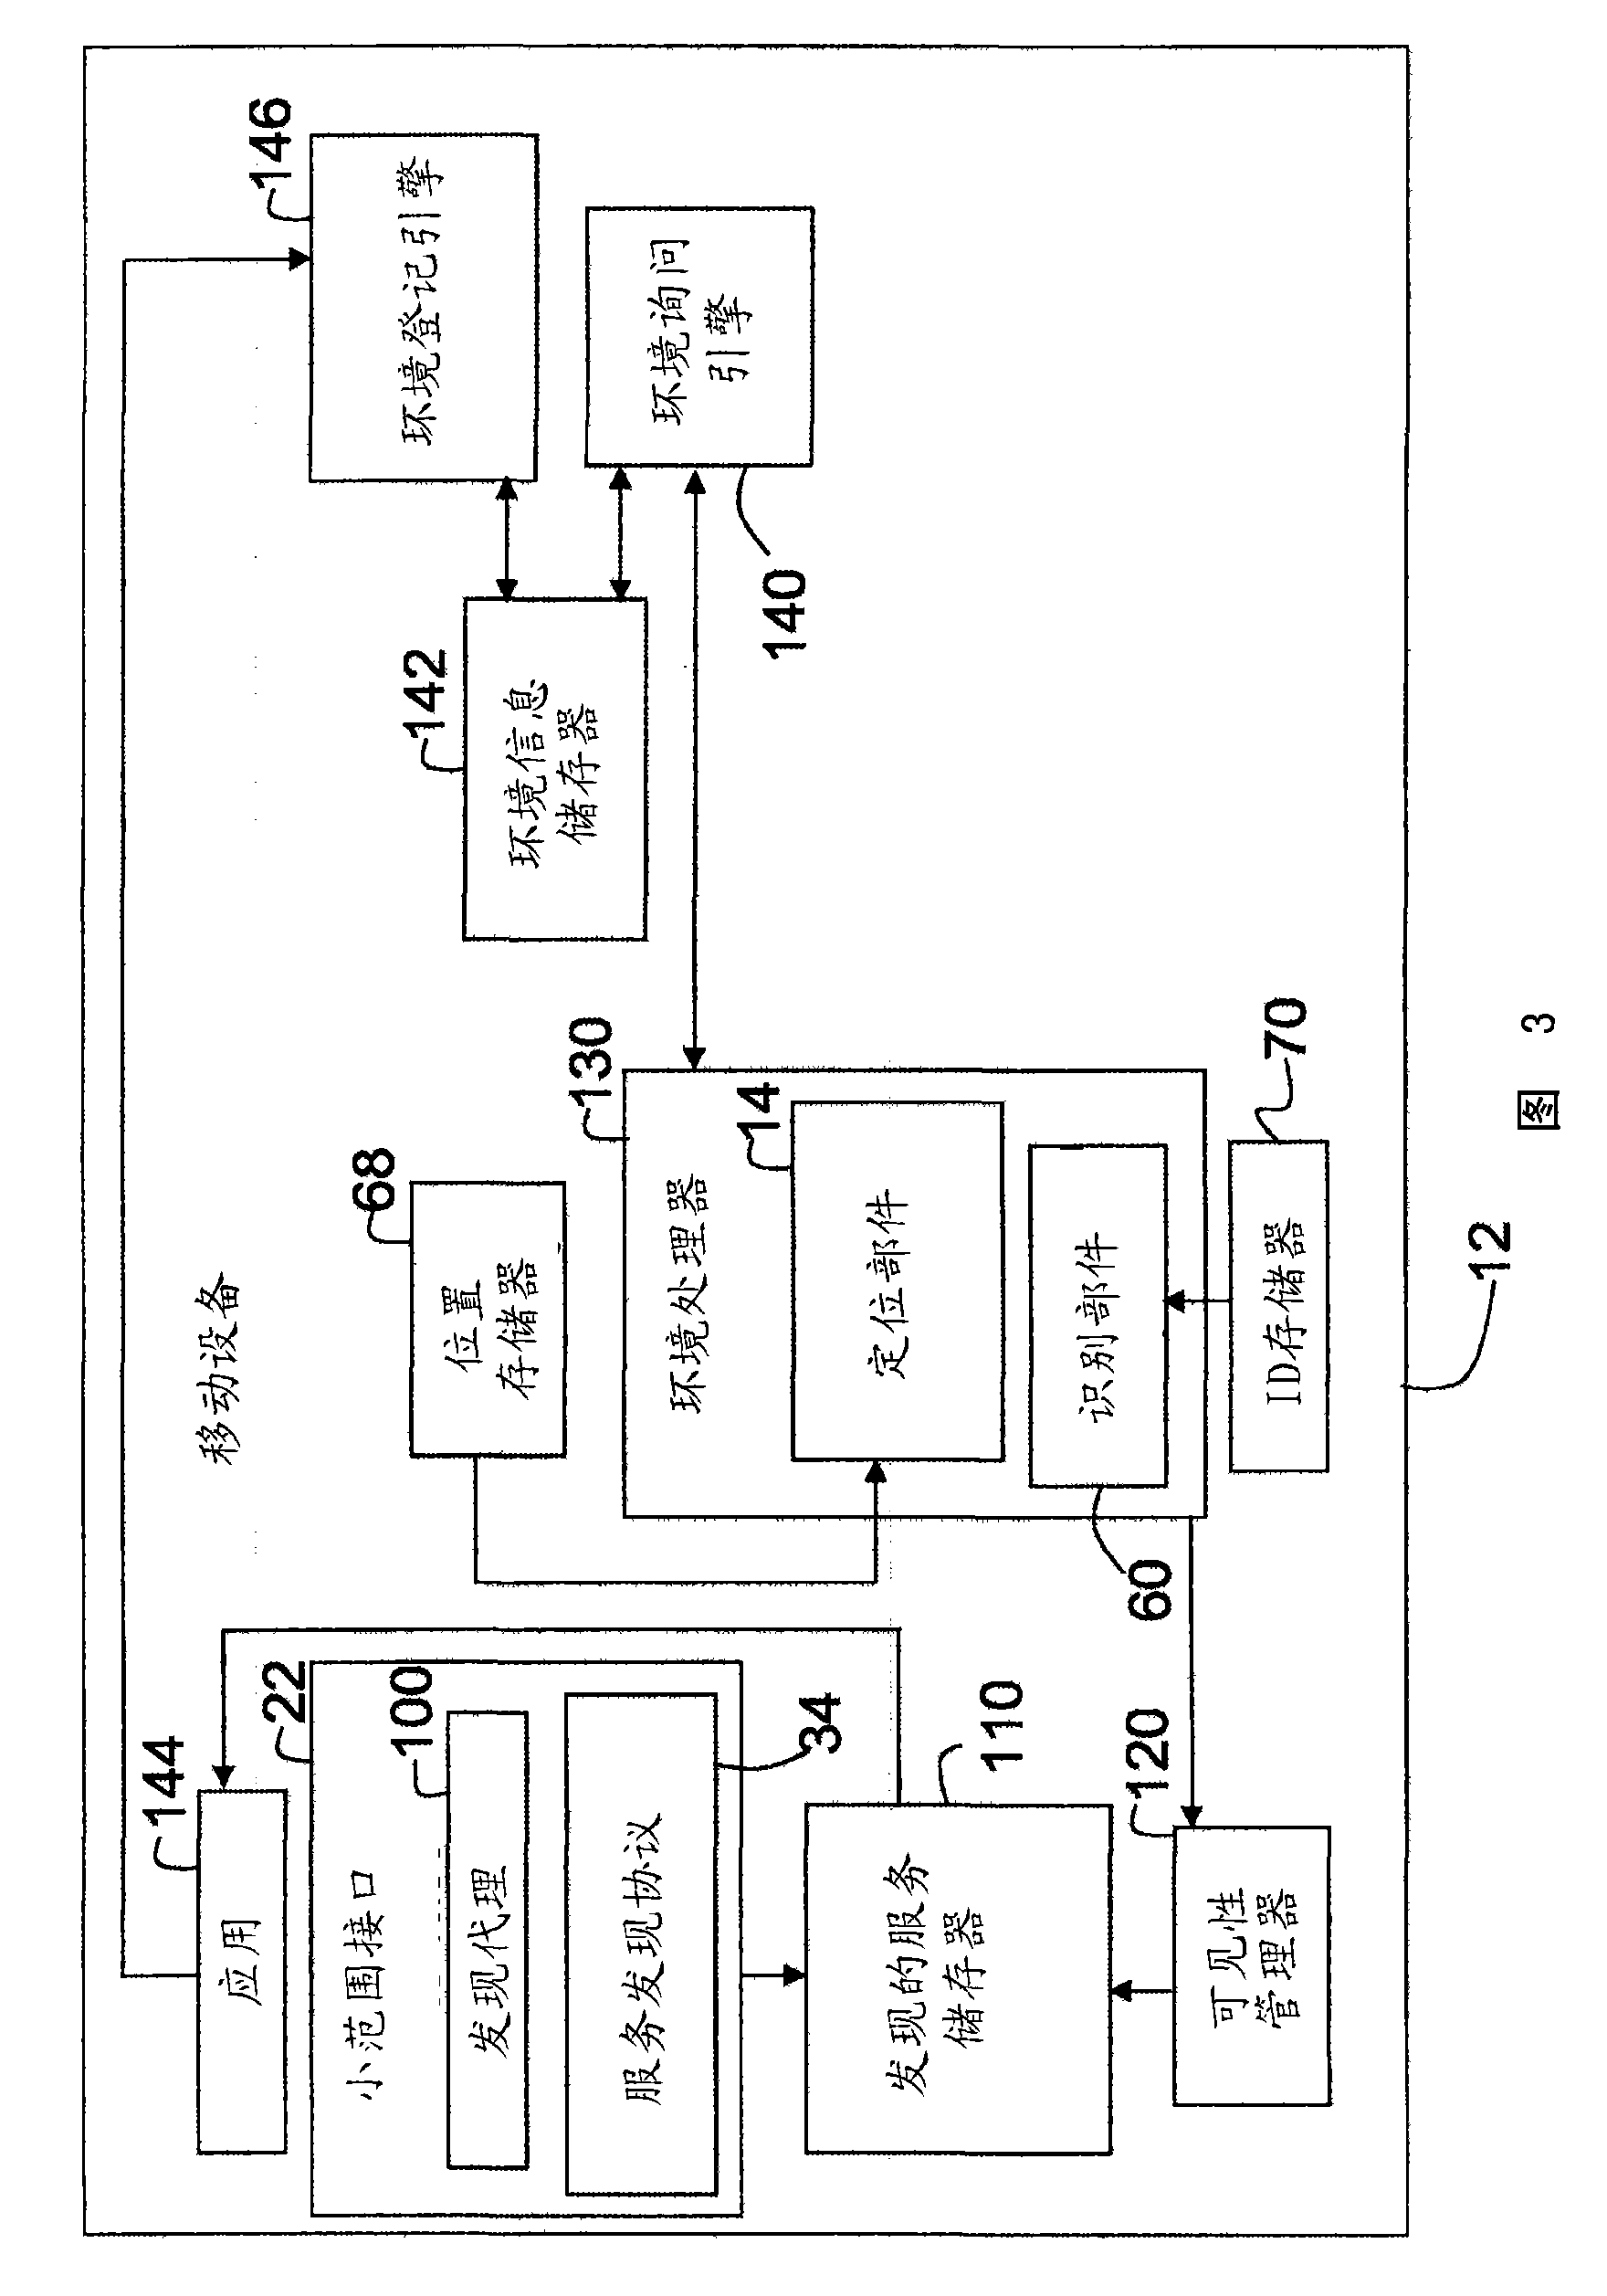 System and method for context dependent service discovery for mobile medical devices